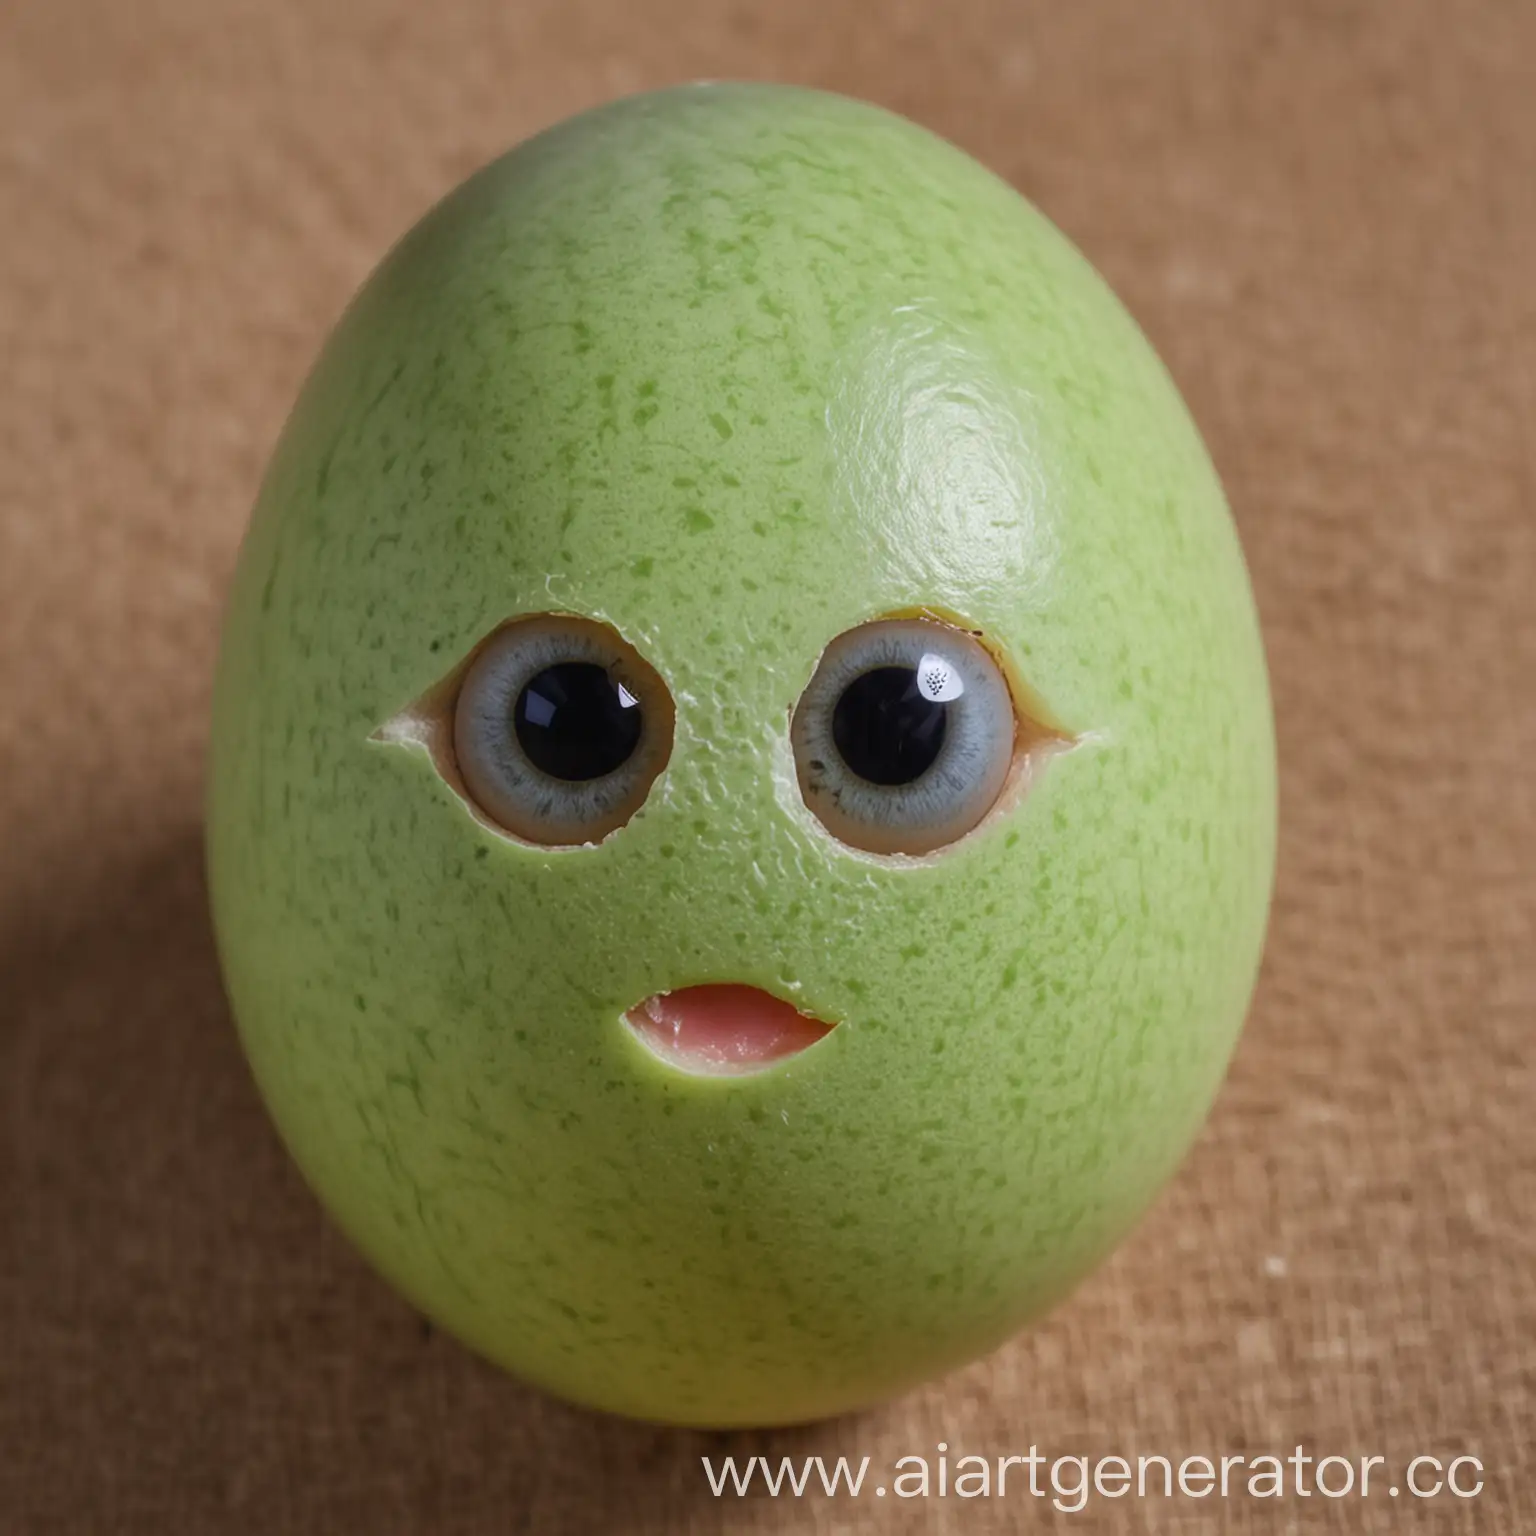 Easter-Egg-with-MelonColored-Eyes-and-Blunt-Face